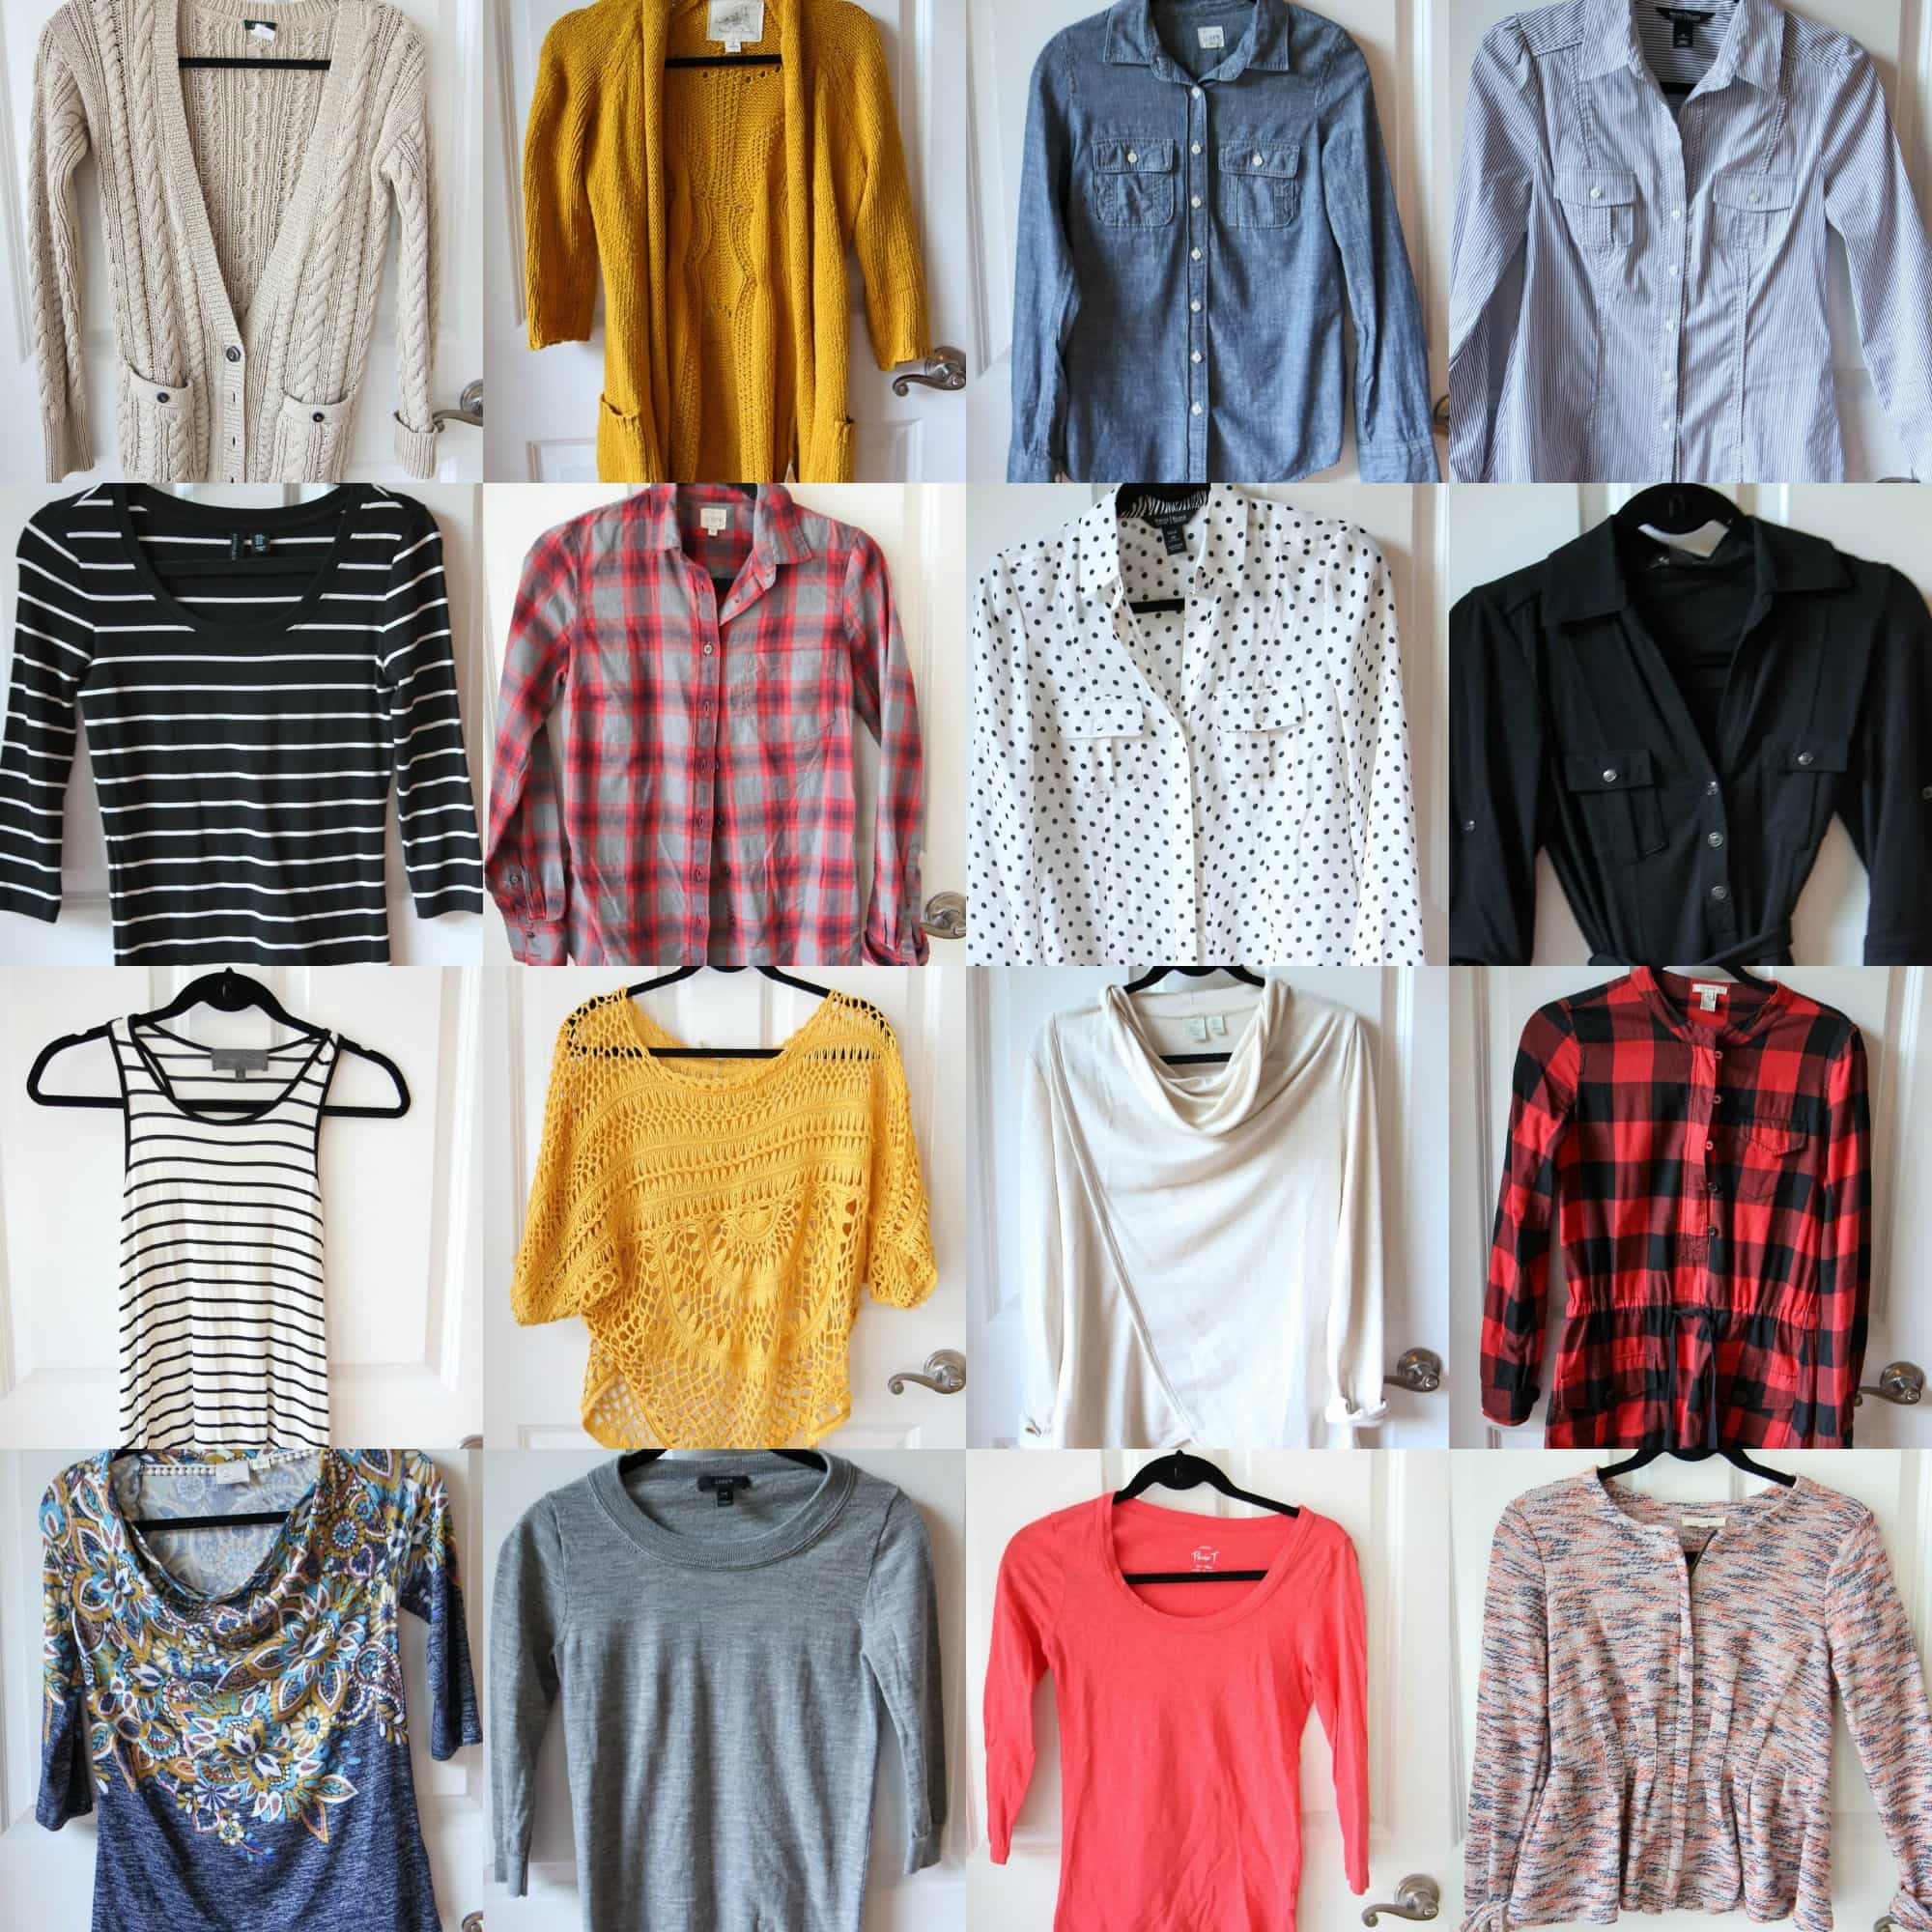 Winter 2016 Fashion Capsule Wardrobe Project from MomAdvice.com